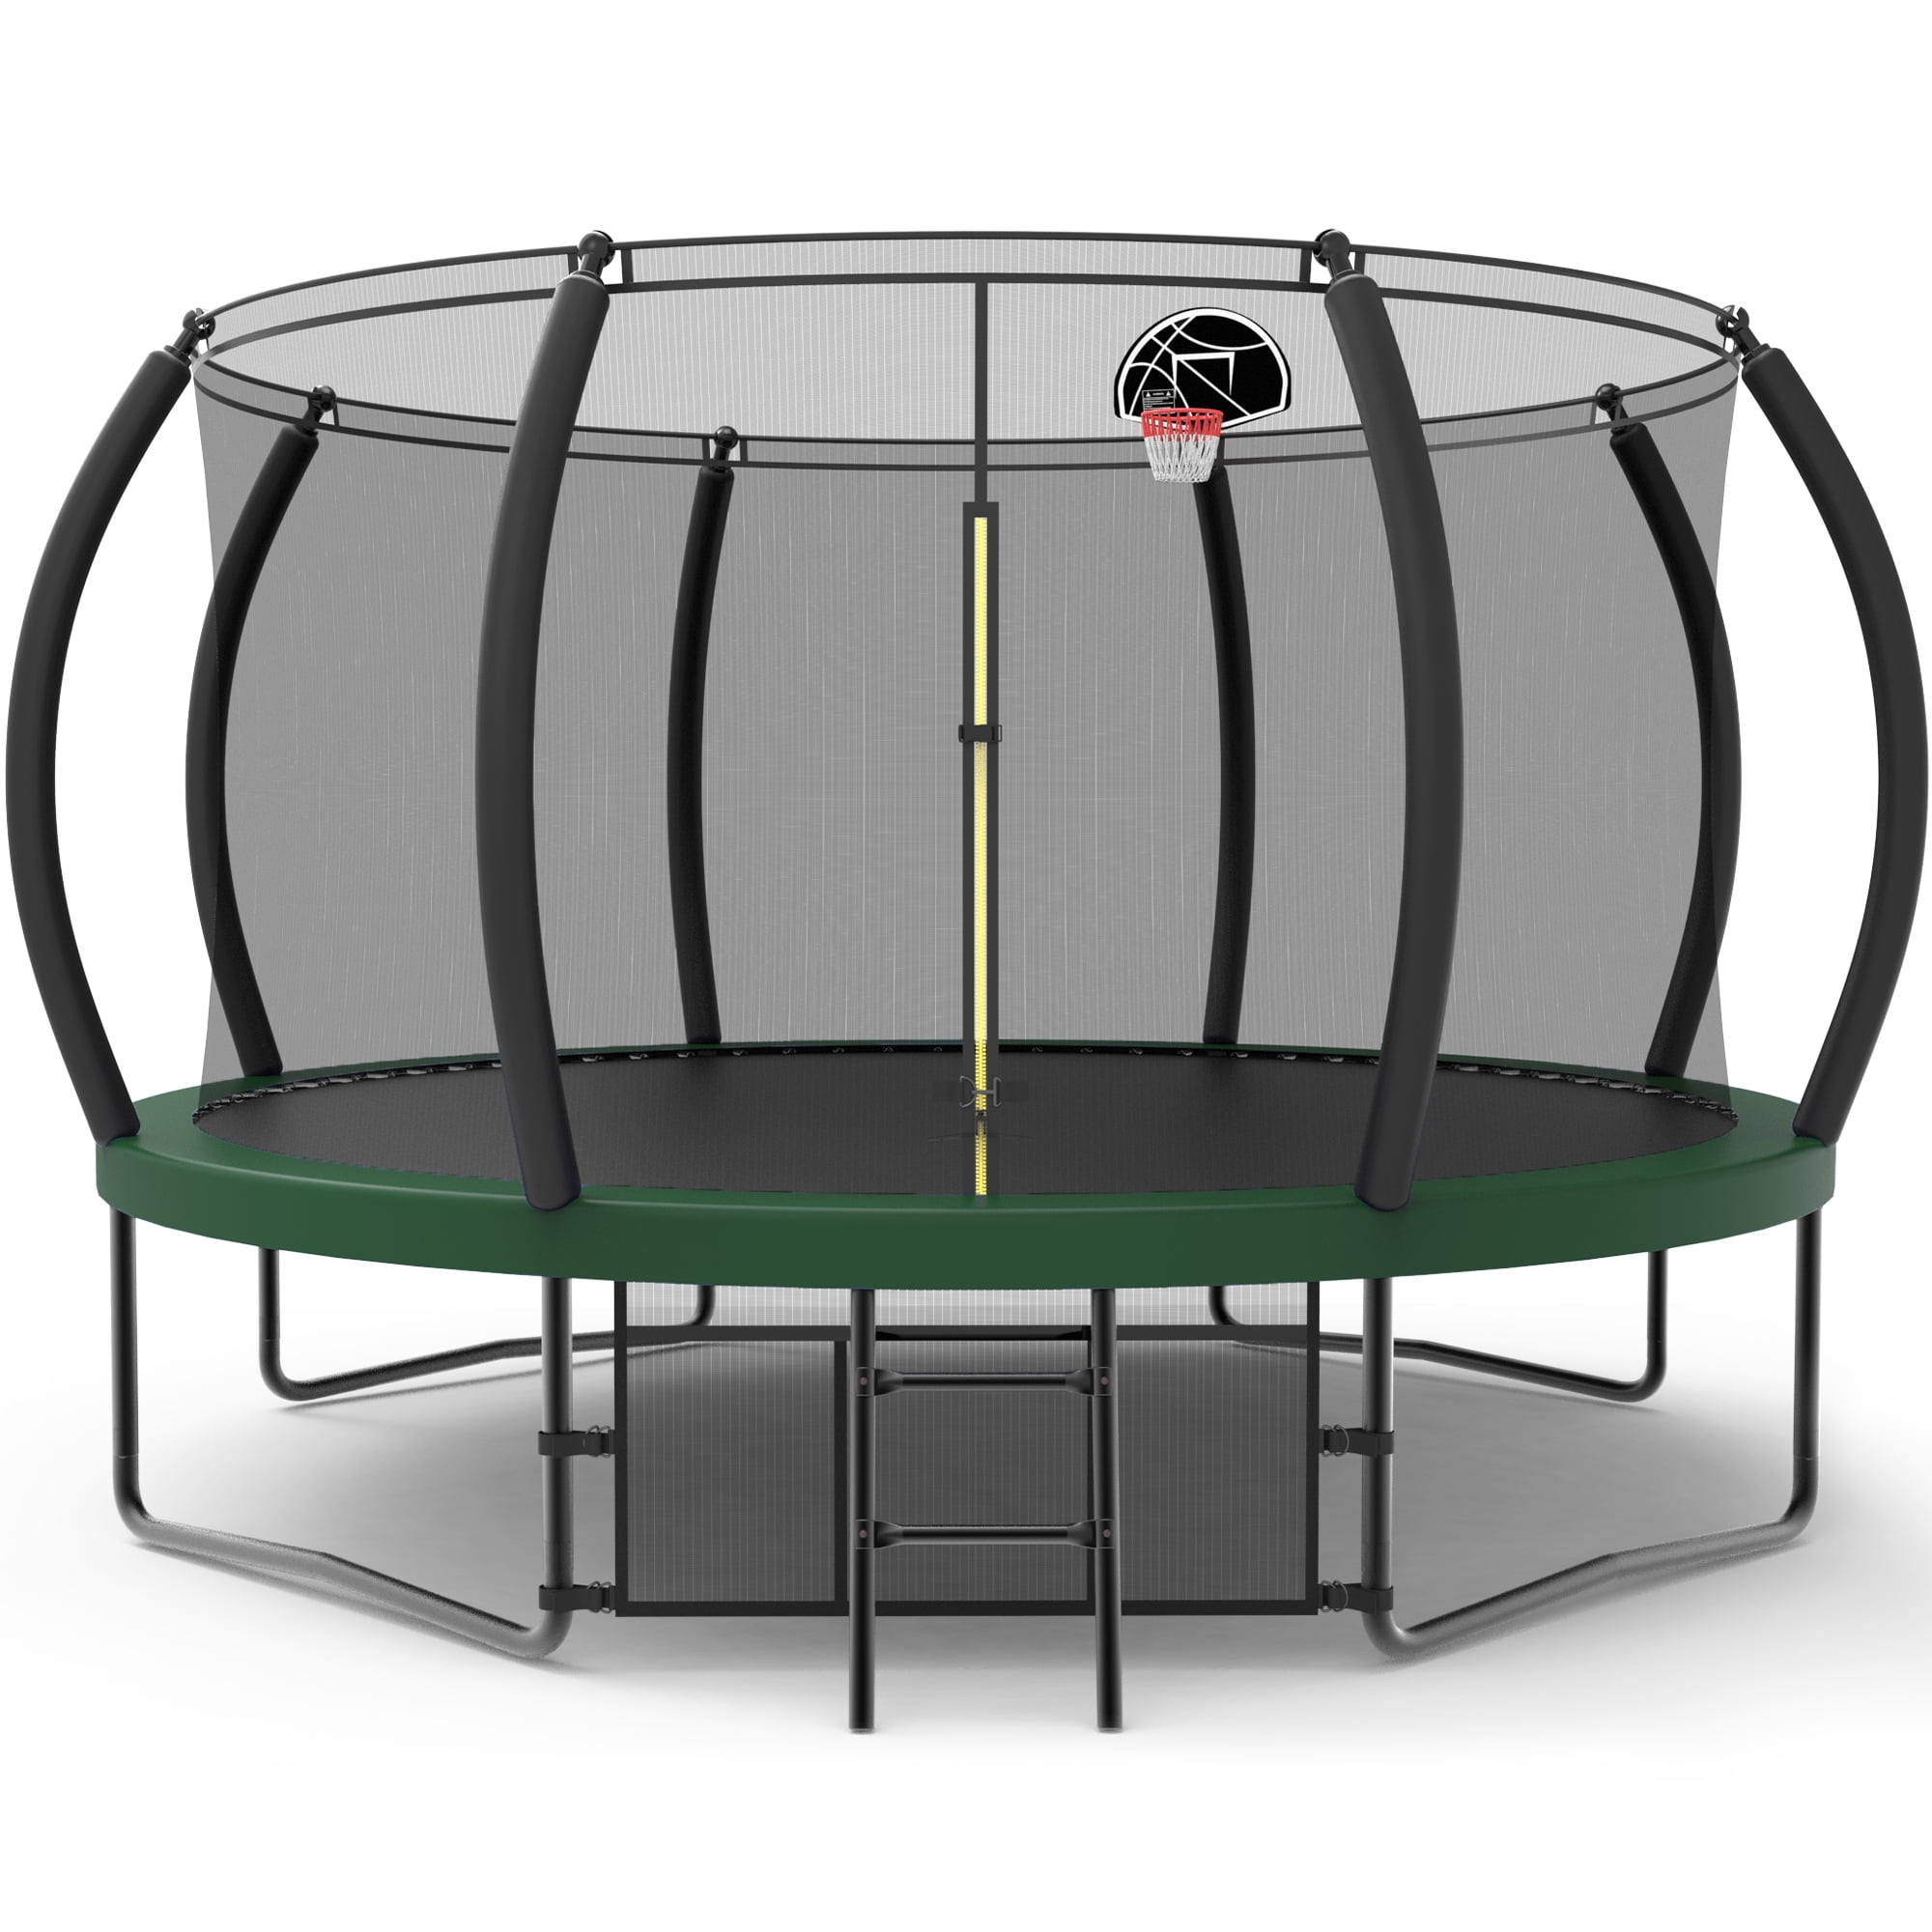 YORIN Trampoline, 14FT Trampoline for Adults and Kids, ASTM Approved ...